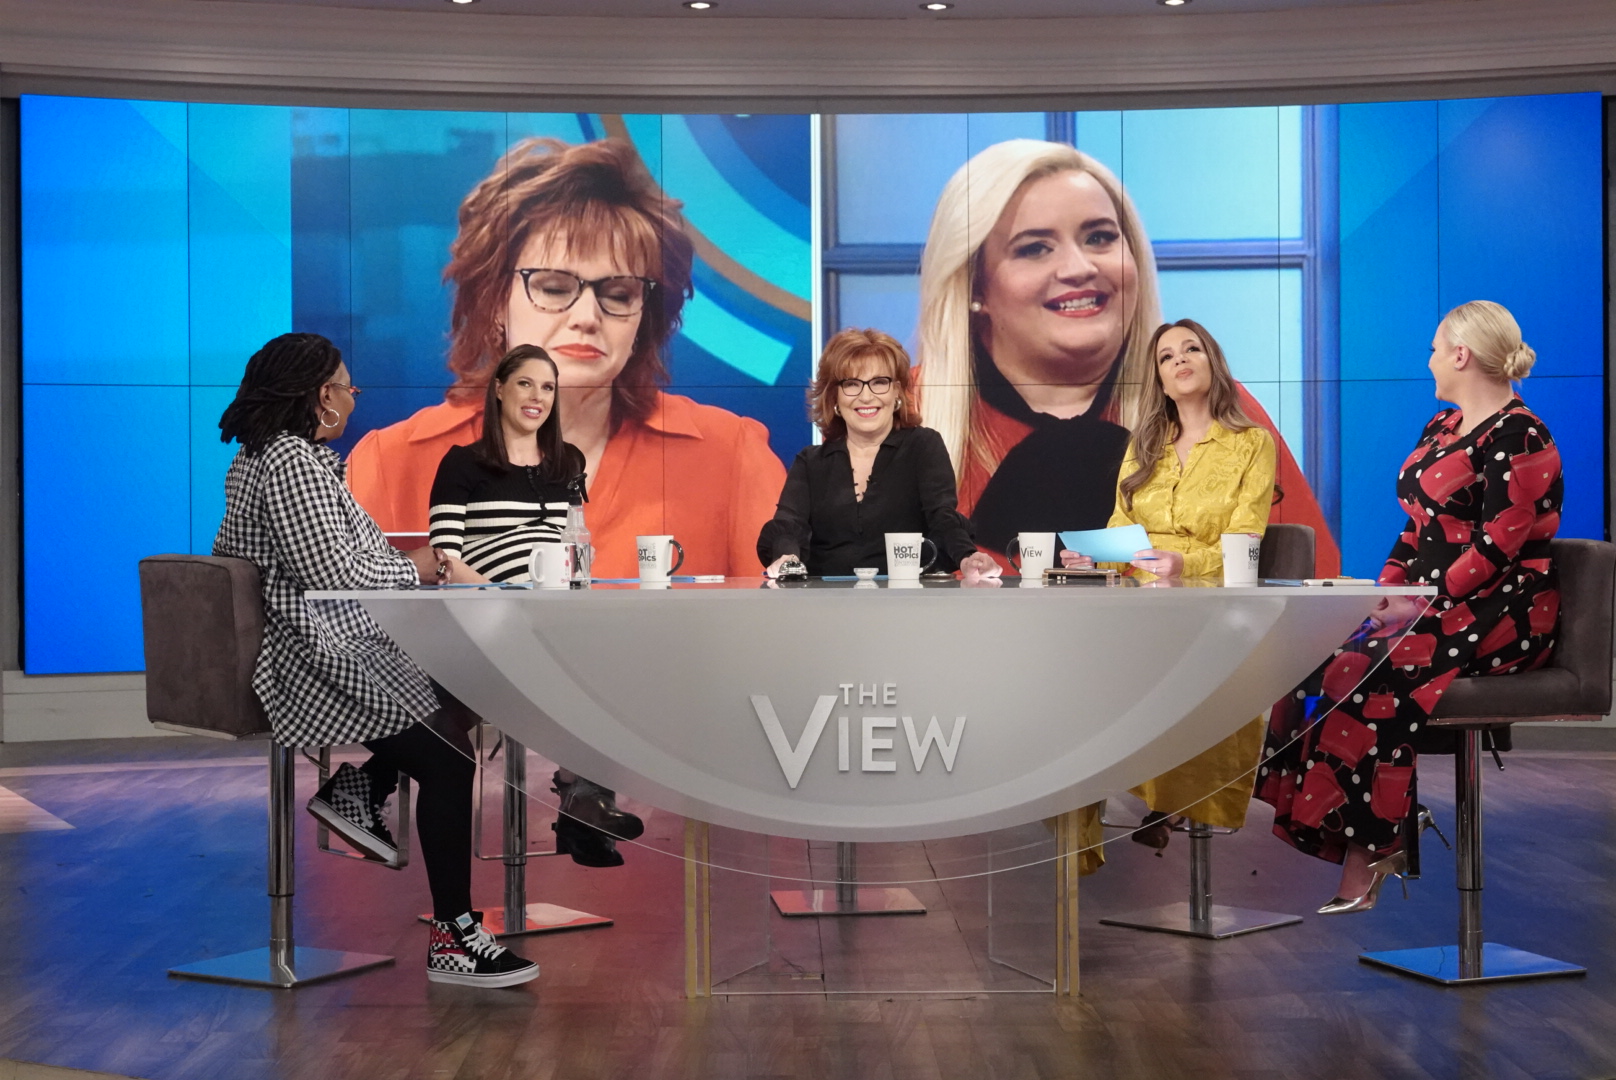 PHOTO: "The View" co-hosts Whoopi Goldberg, Abby Huntsman, Joy Behar, Sunny Hostin, and Meghan McCain respond to the "Saturday Night Live" parody of their on-air discussions on Monday, April 22, 2019.